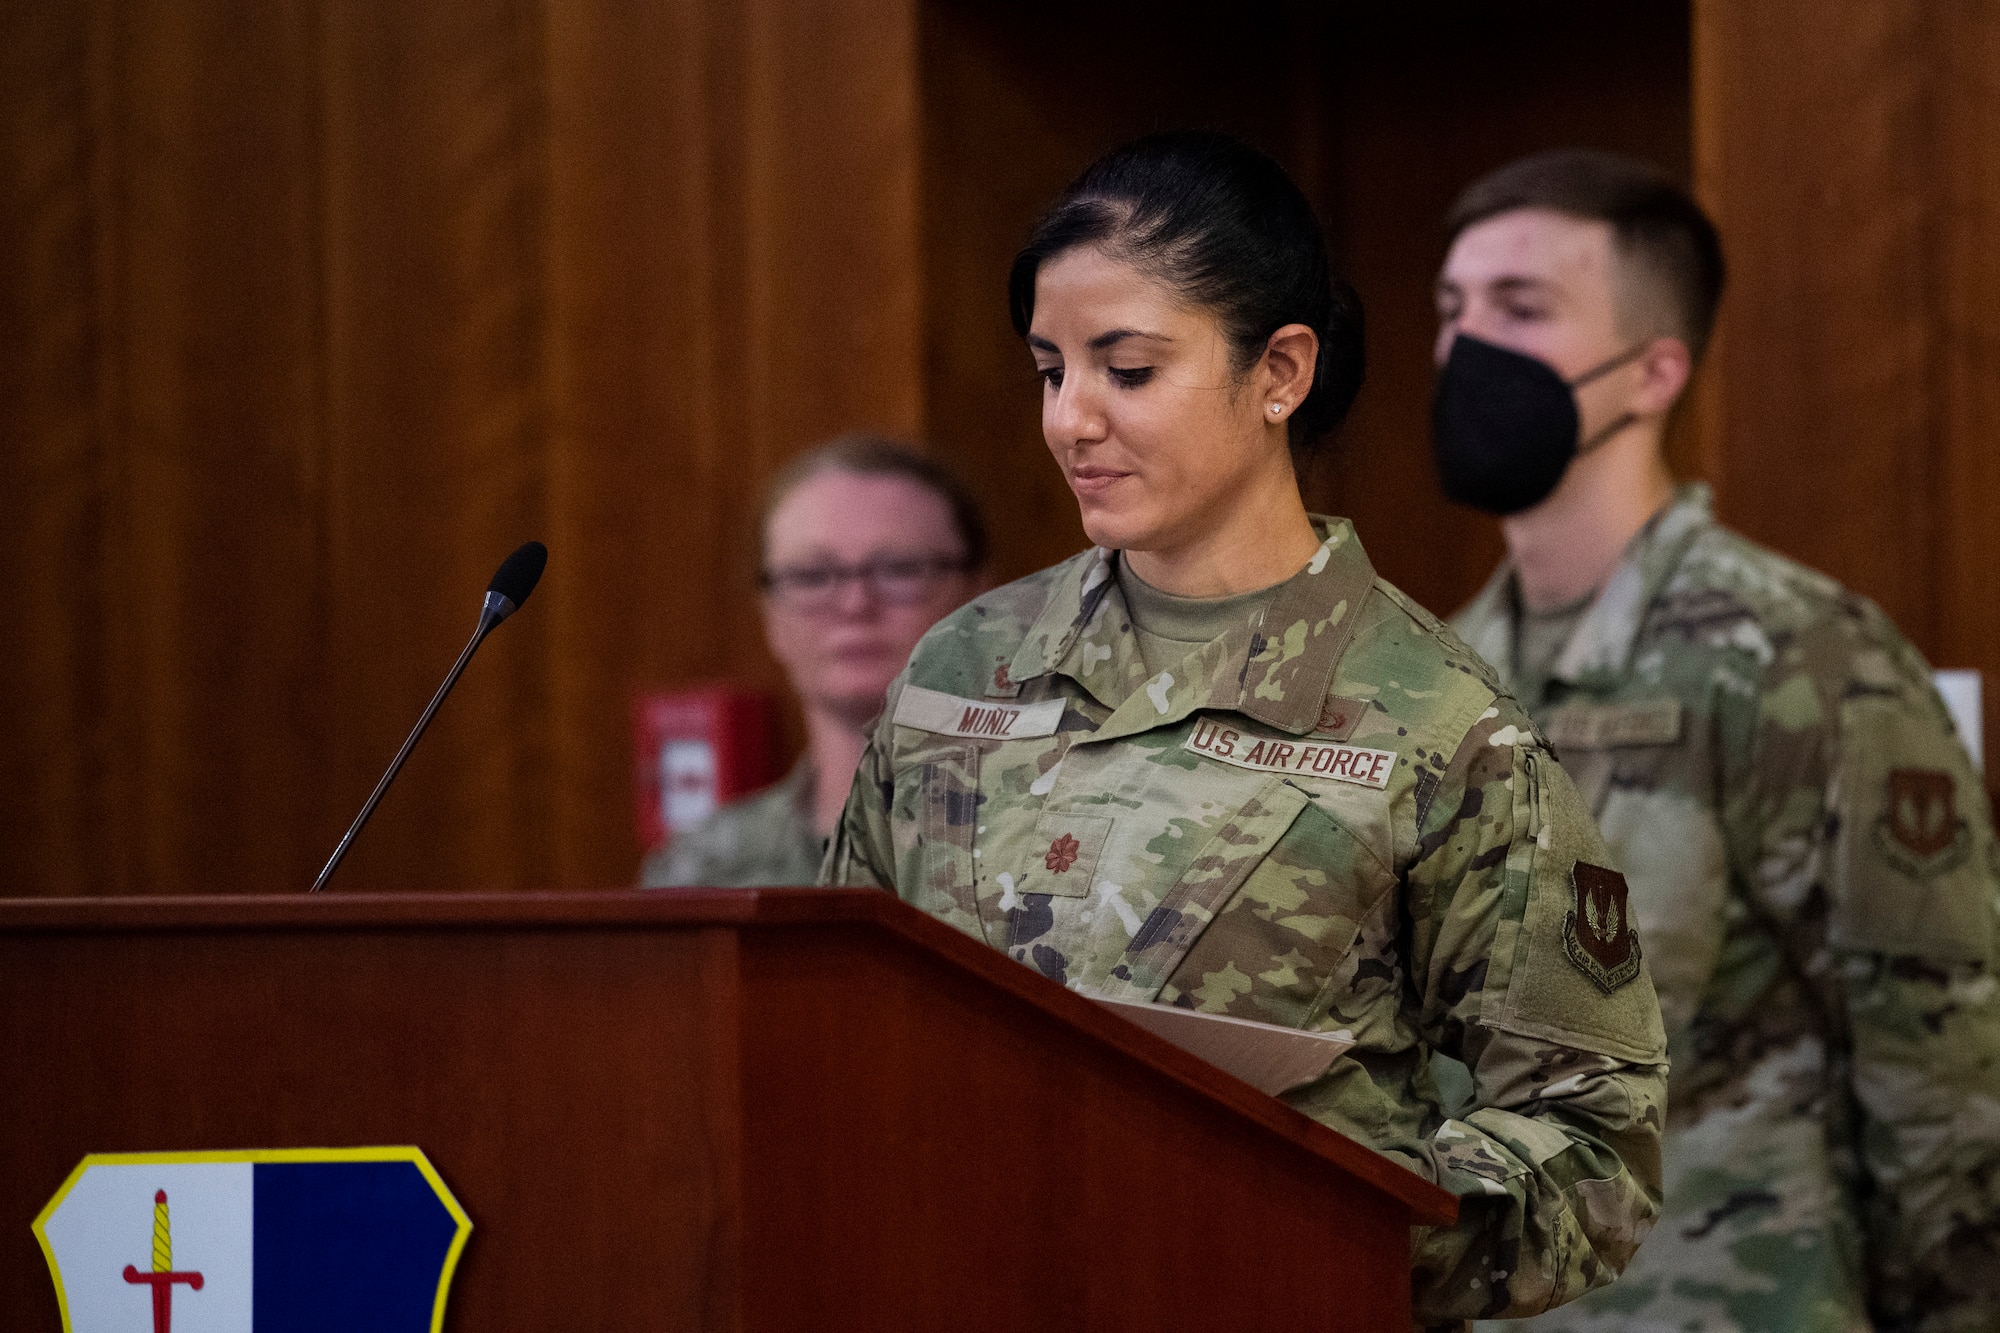 U.S. Air Force Maj. Ingrid Muniz addresses the crowd at the 52nd Force Support Squadron change of command ceremony July 6, 2021, on Spangdahlem Air Base, Germany. The FSS supports the 52nd Fighter Wing with airman and family services, community services, and force development services to provide quality support to service members, civilian personnel and their families. (U.S. Air Force photo by Senior Airman Ali Stewart)